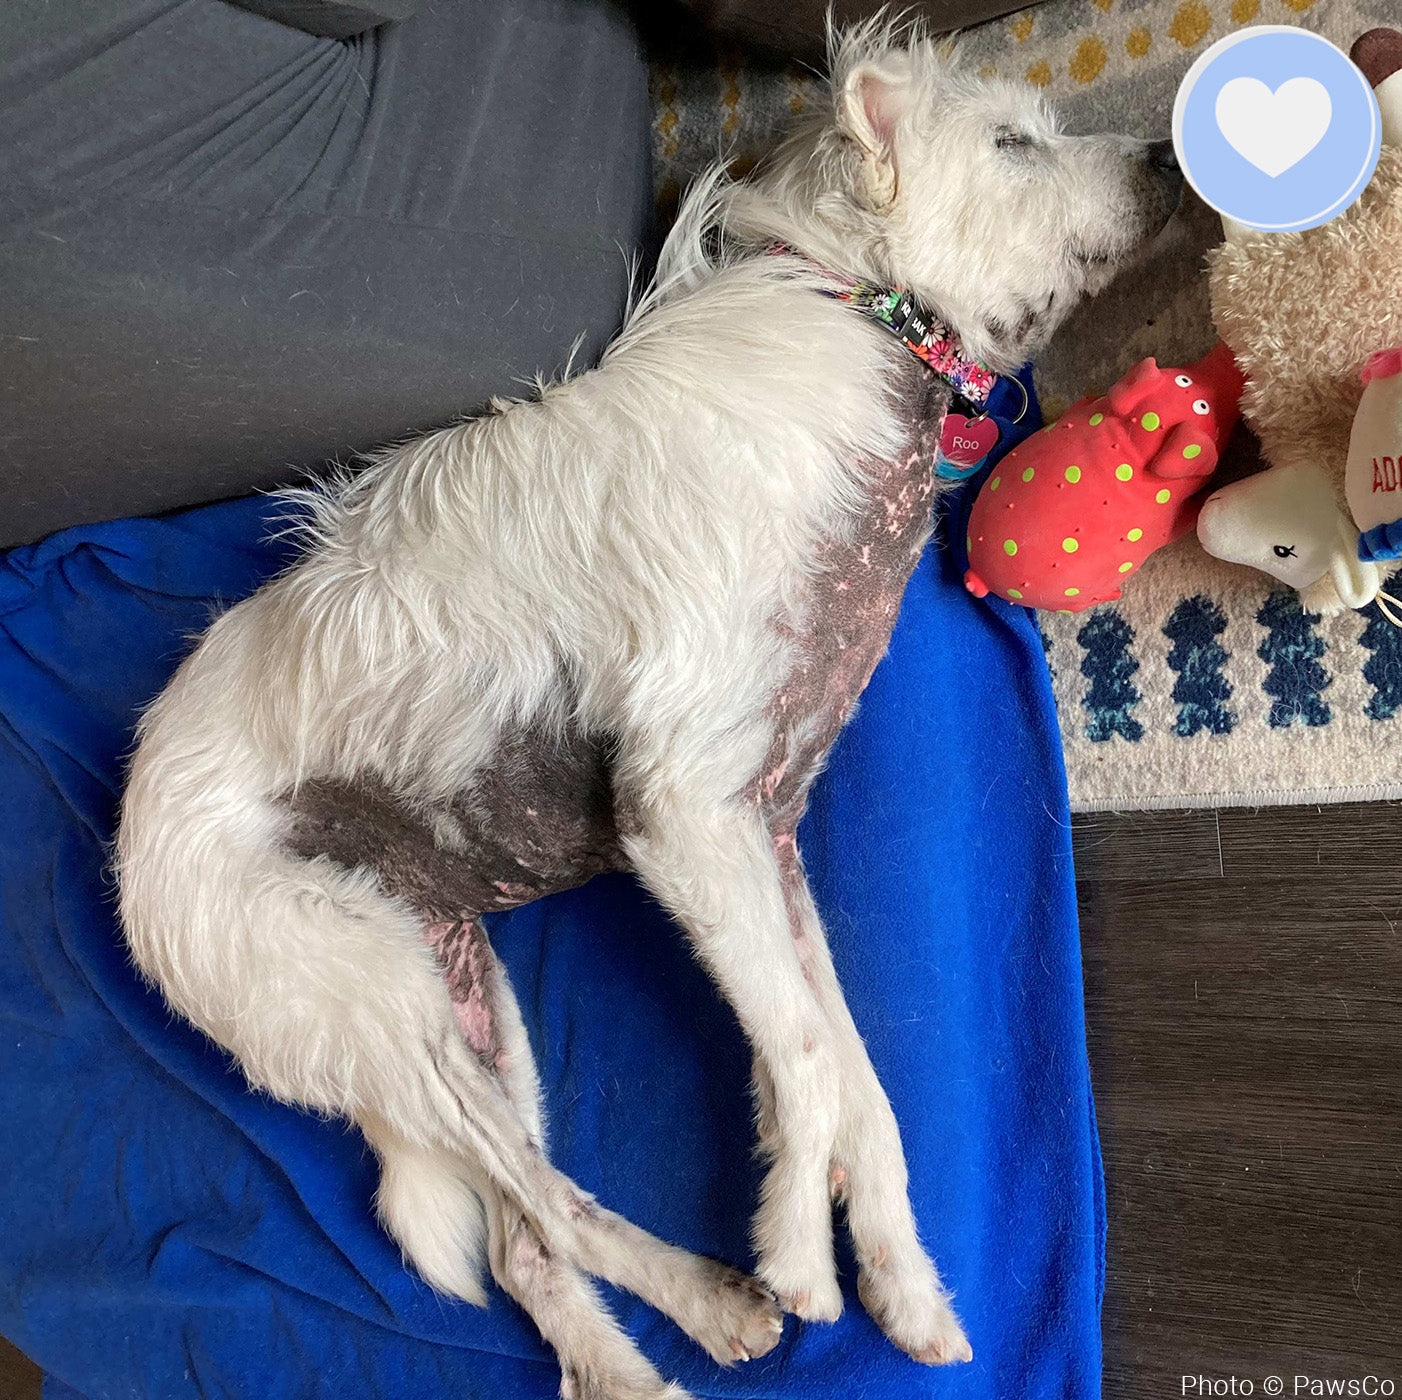 Funded - Help Roo Live Pain Free